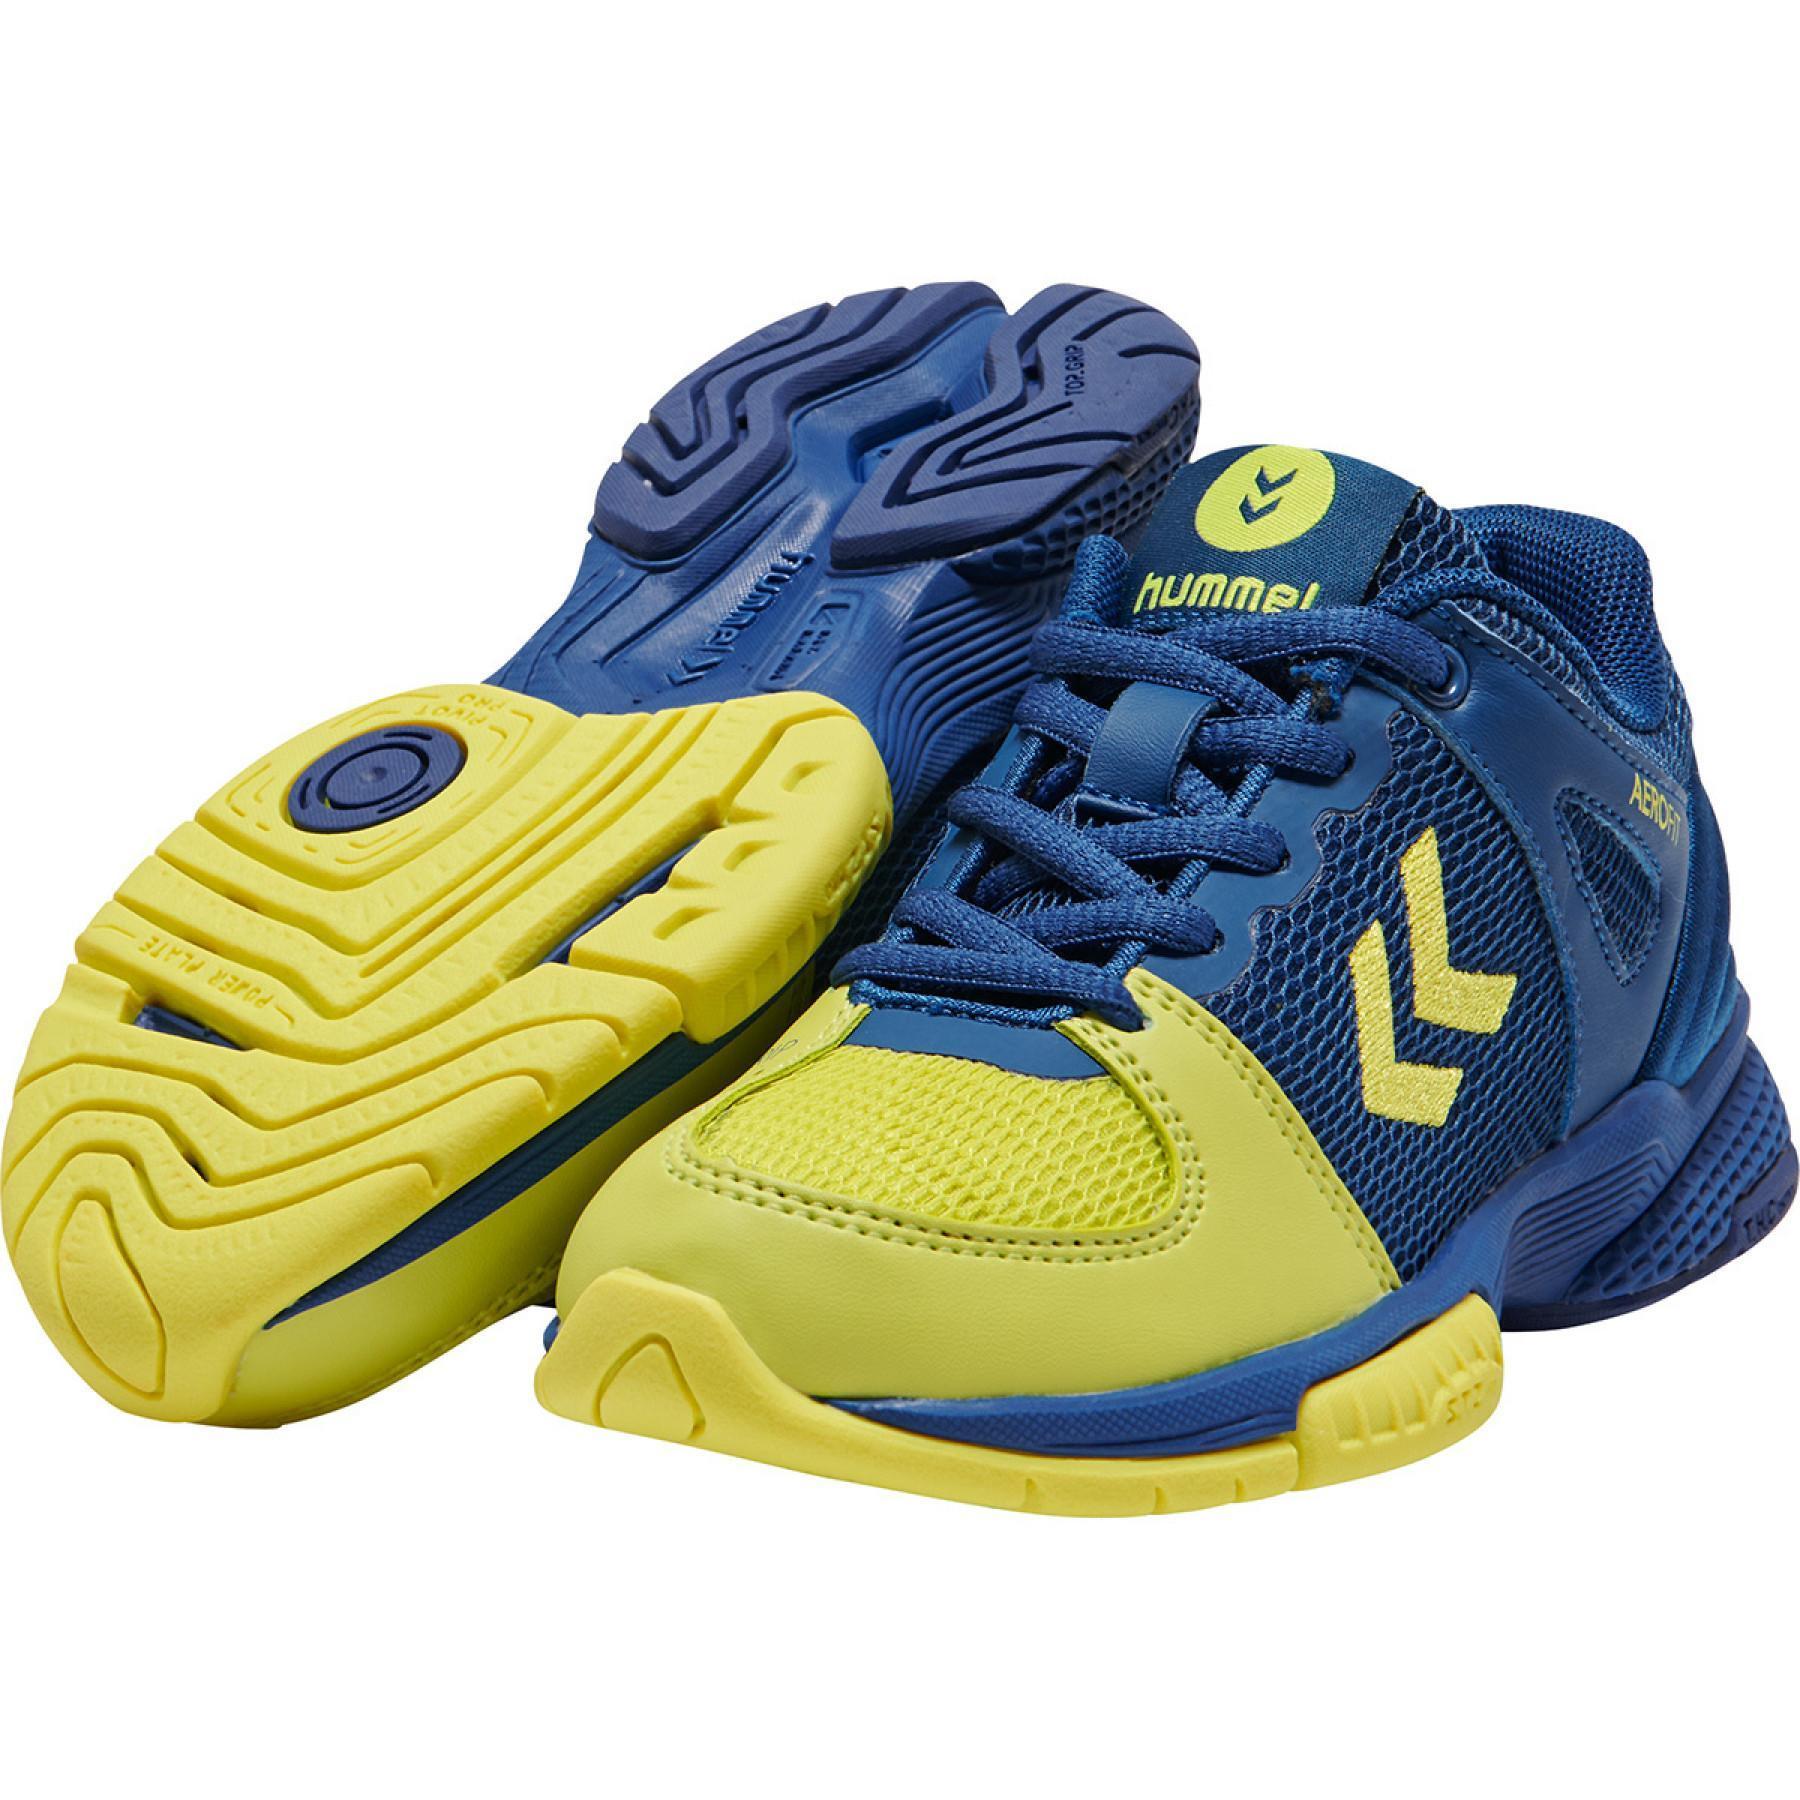 Chaussures enfant aerocharge hb200 speed 3.0